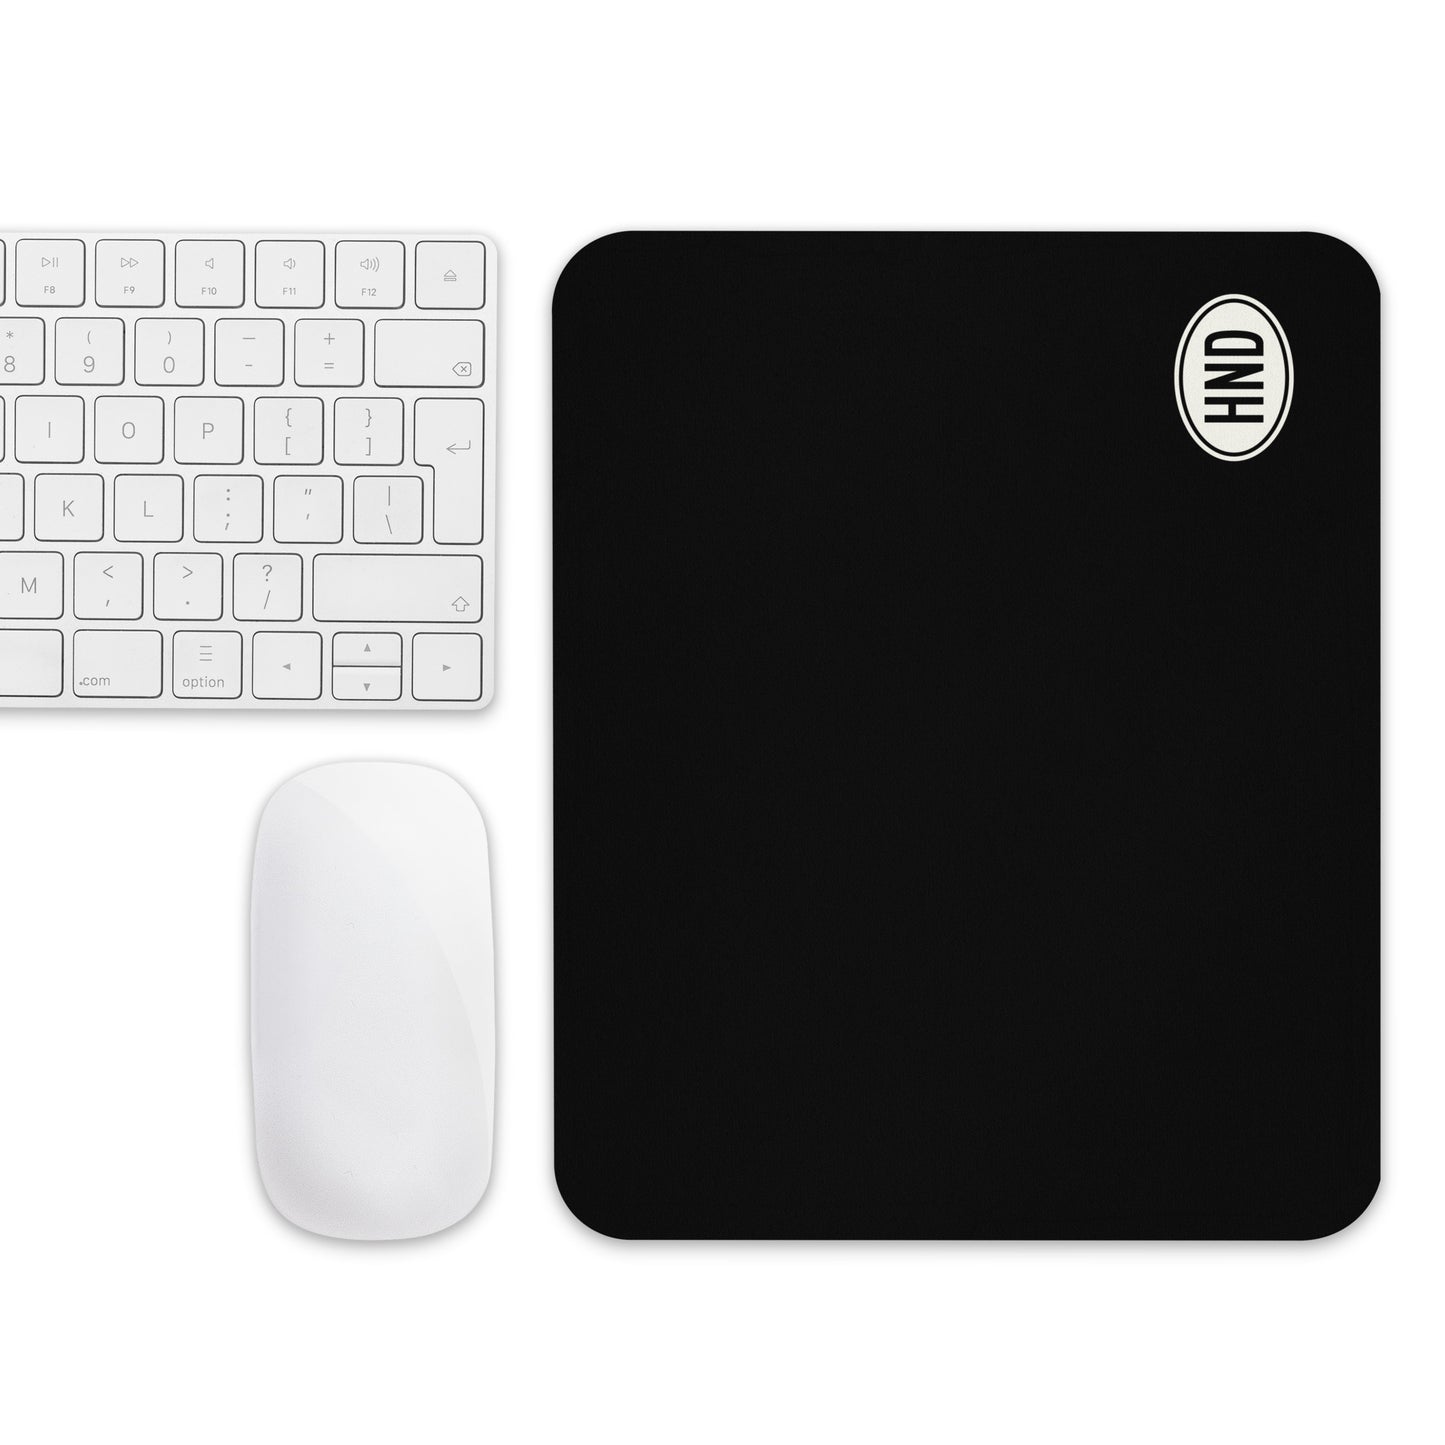 Unique Travel Gift Mouse Pad - White Oval • HND Tokyo • YHM Designs - Image 04